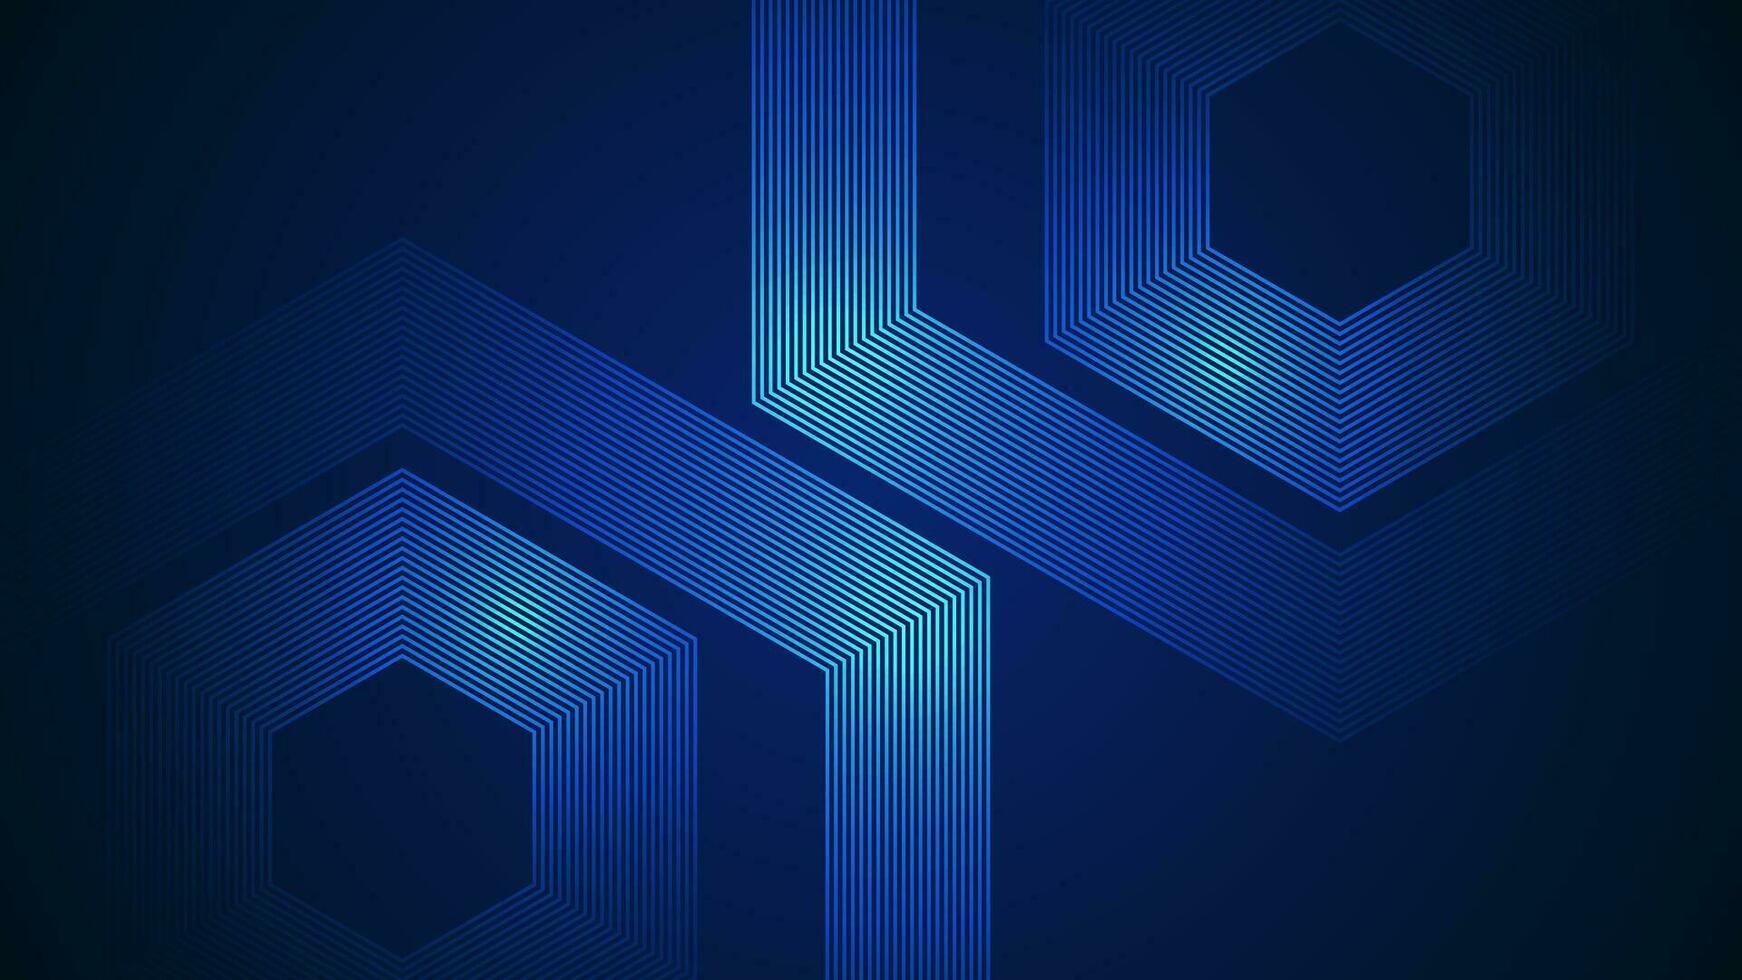 Dark blue simple abstract background with lines in a geometric style as the main element. vector